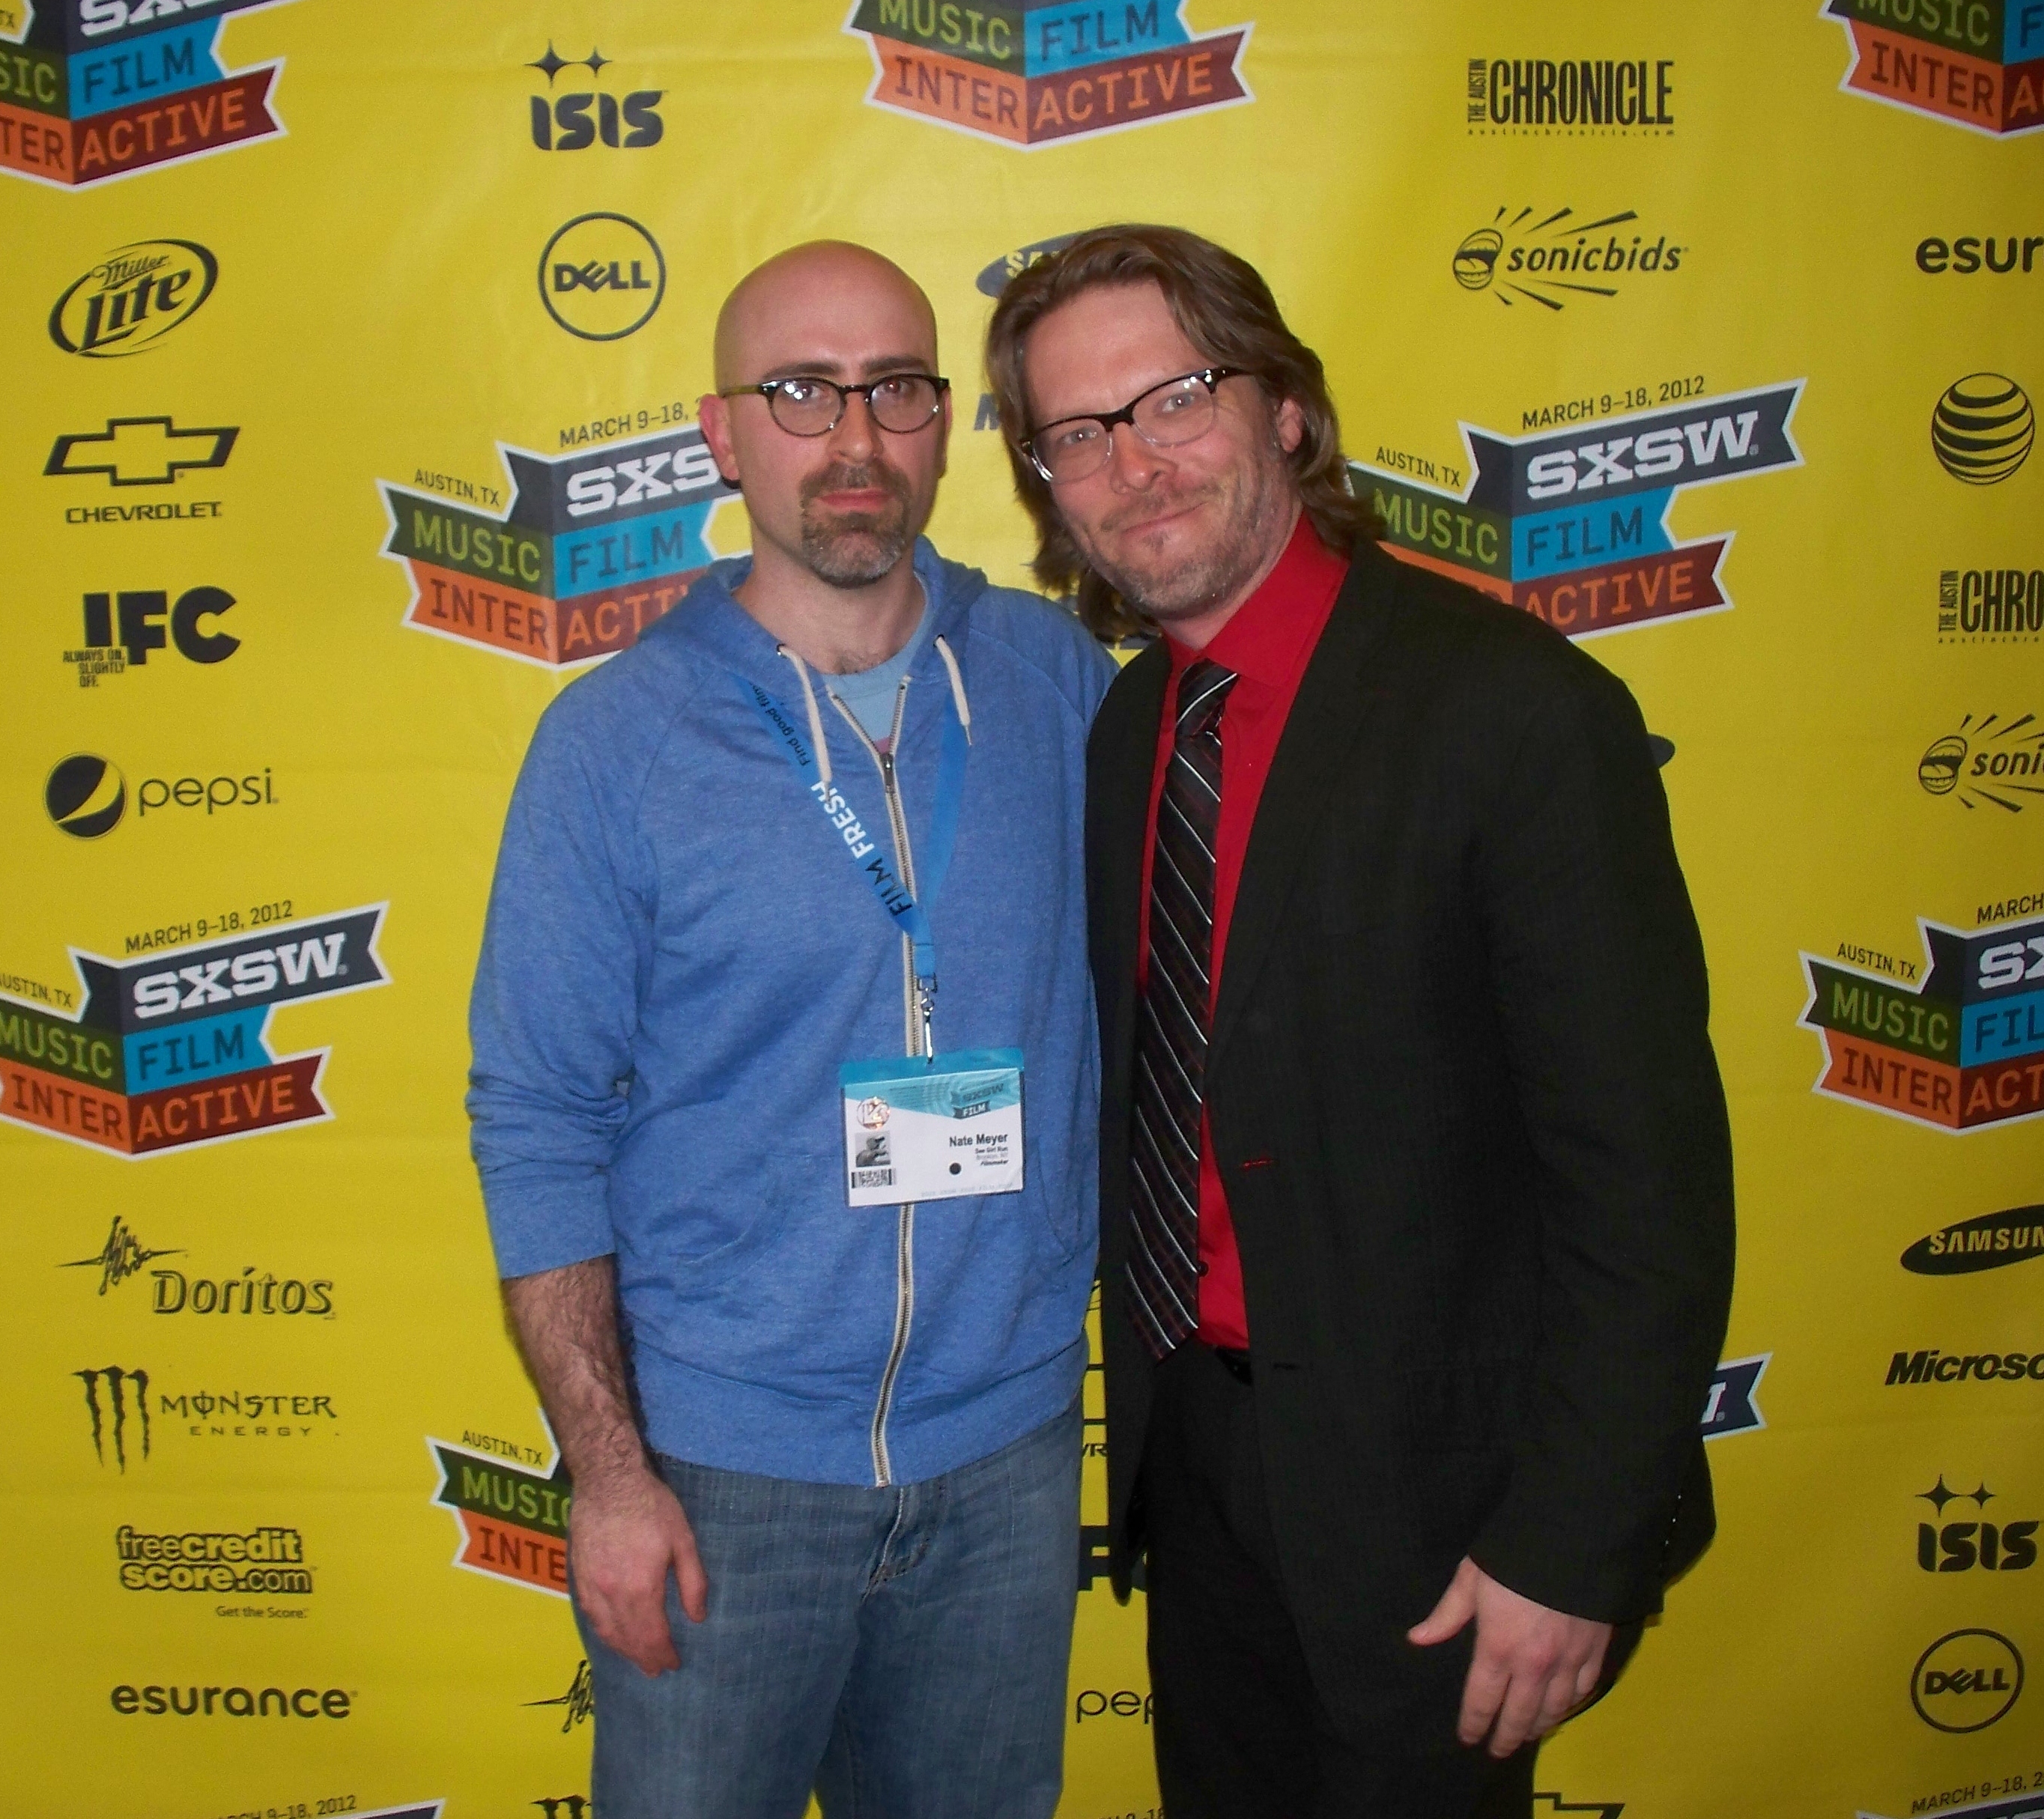 Miles Doleac with director and long-time friend, Nate Meyer, at the world premiere of 